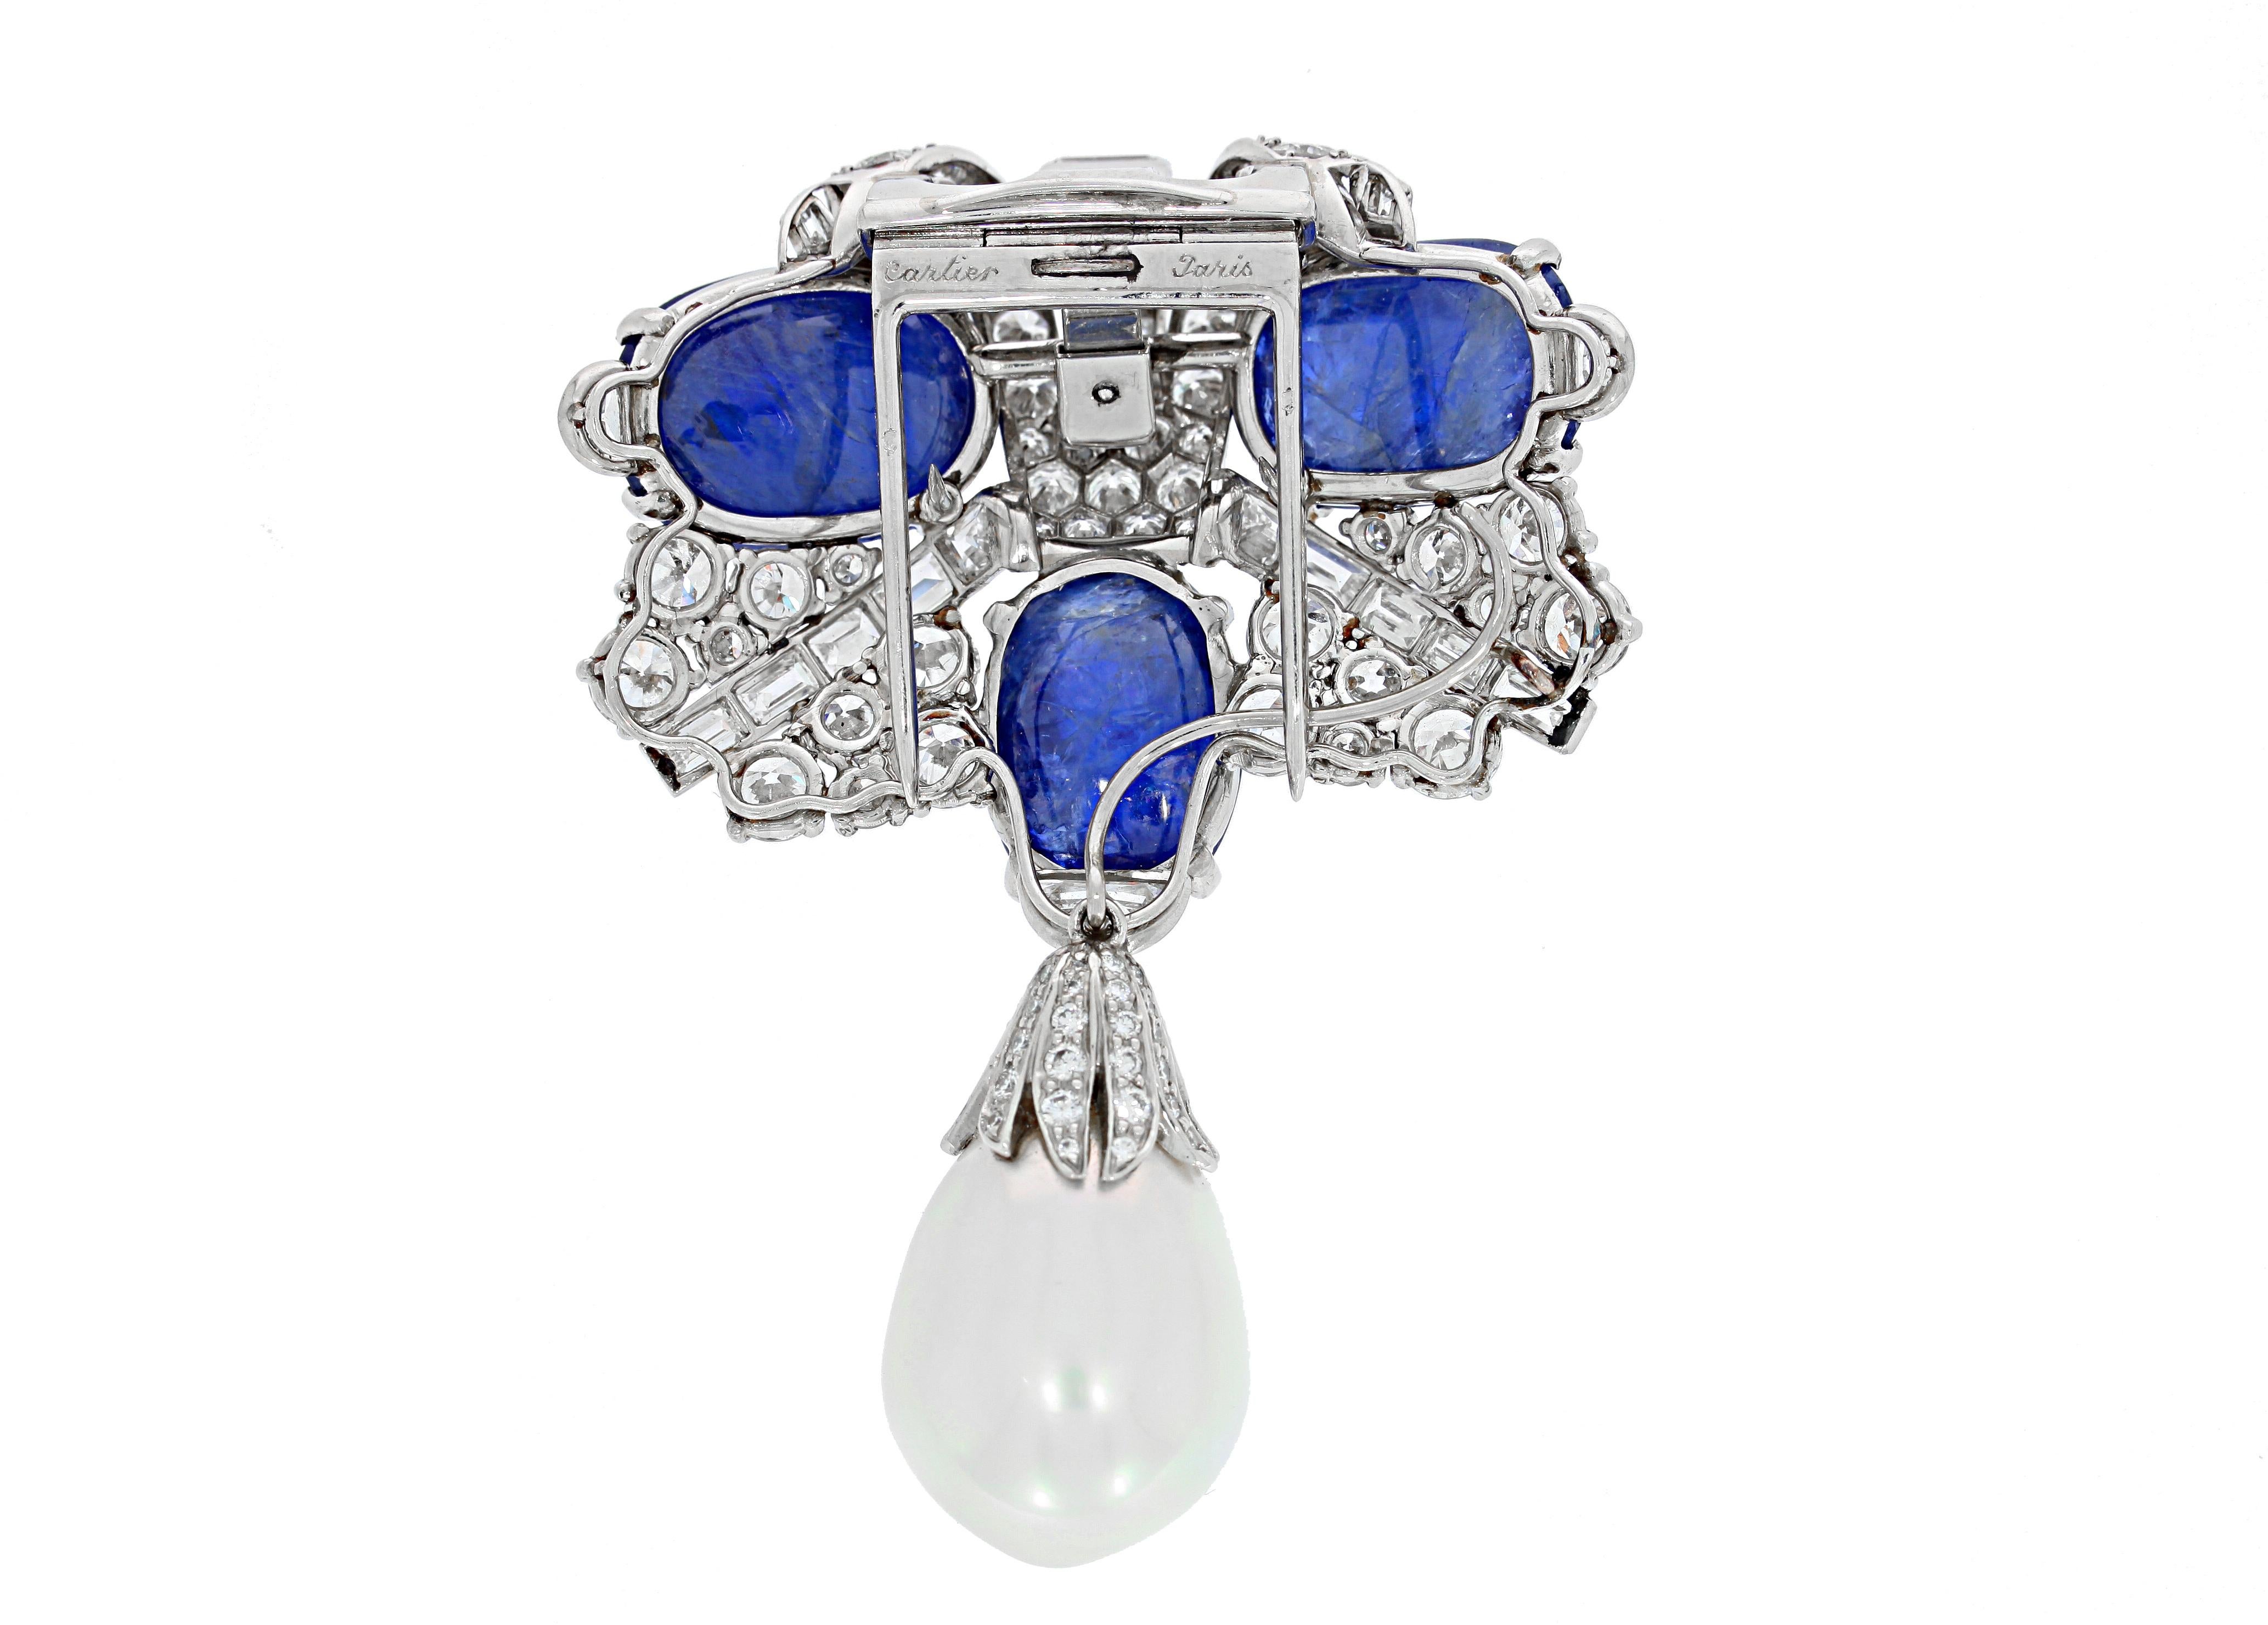 From the iconic house of Cartier Paris, this vintage 1950's platinum brooch consists of 3 cabochon non-heated Burmese sapphires, white diamonds, and a dangling pearl. Signed Cartier Paris. A rare find that will make the perfect addition to your